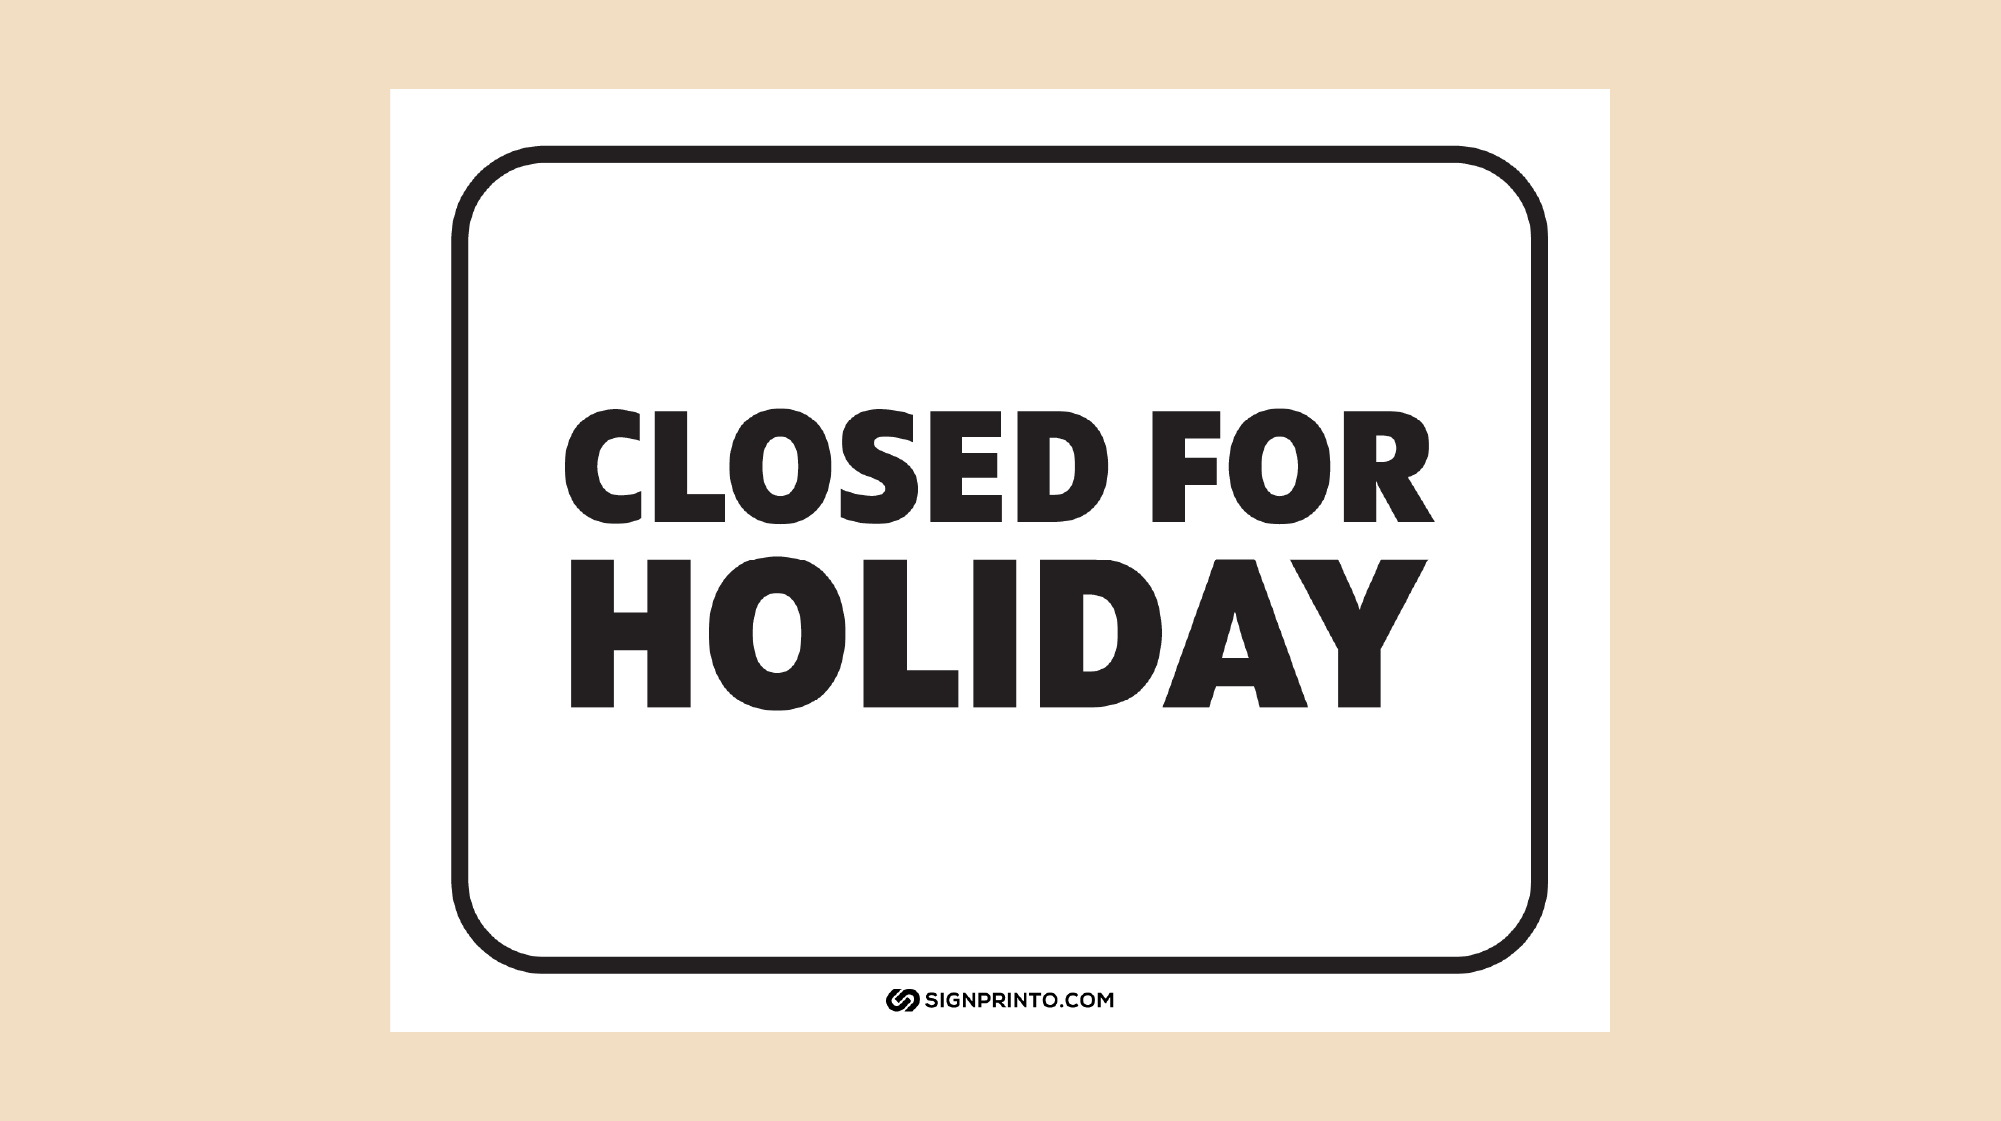 Closed For the Holiday Sign black text